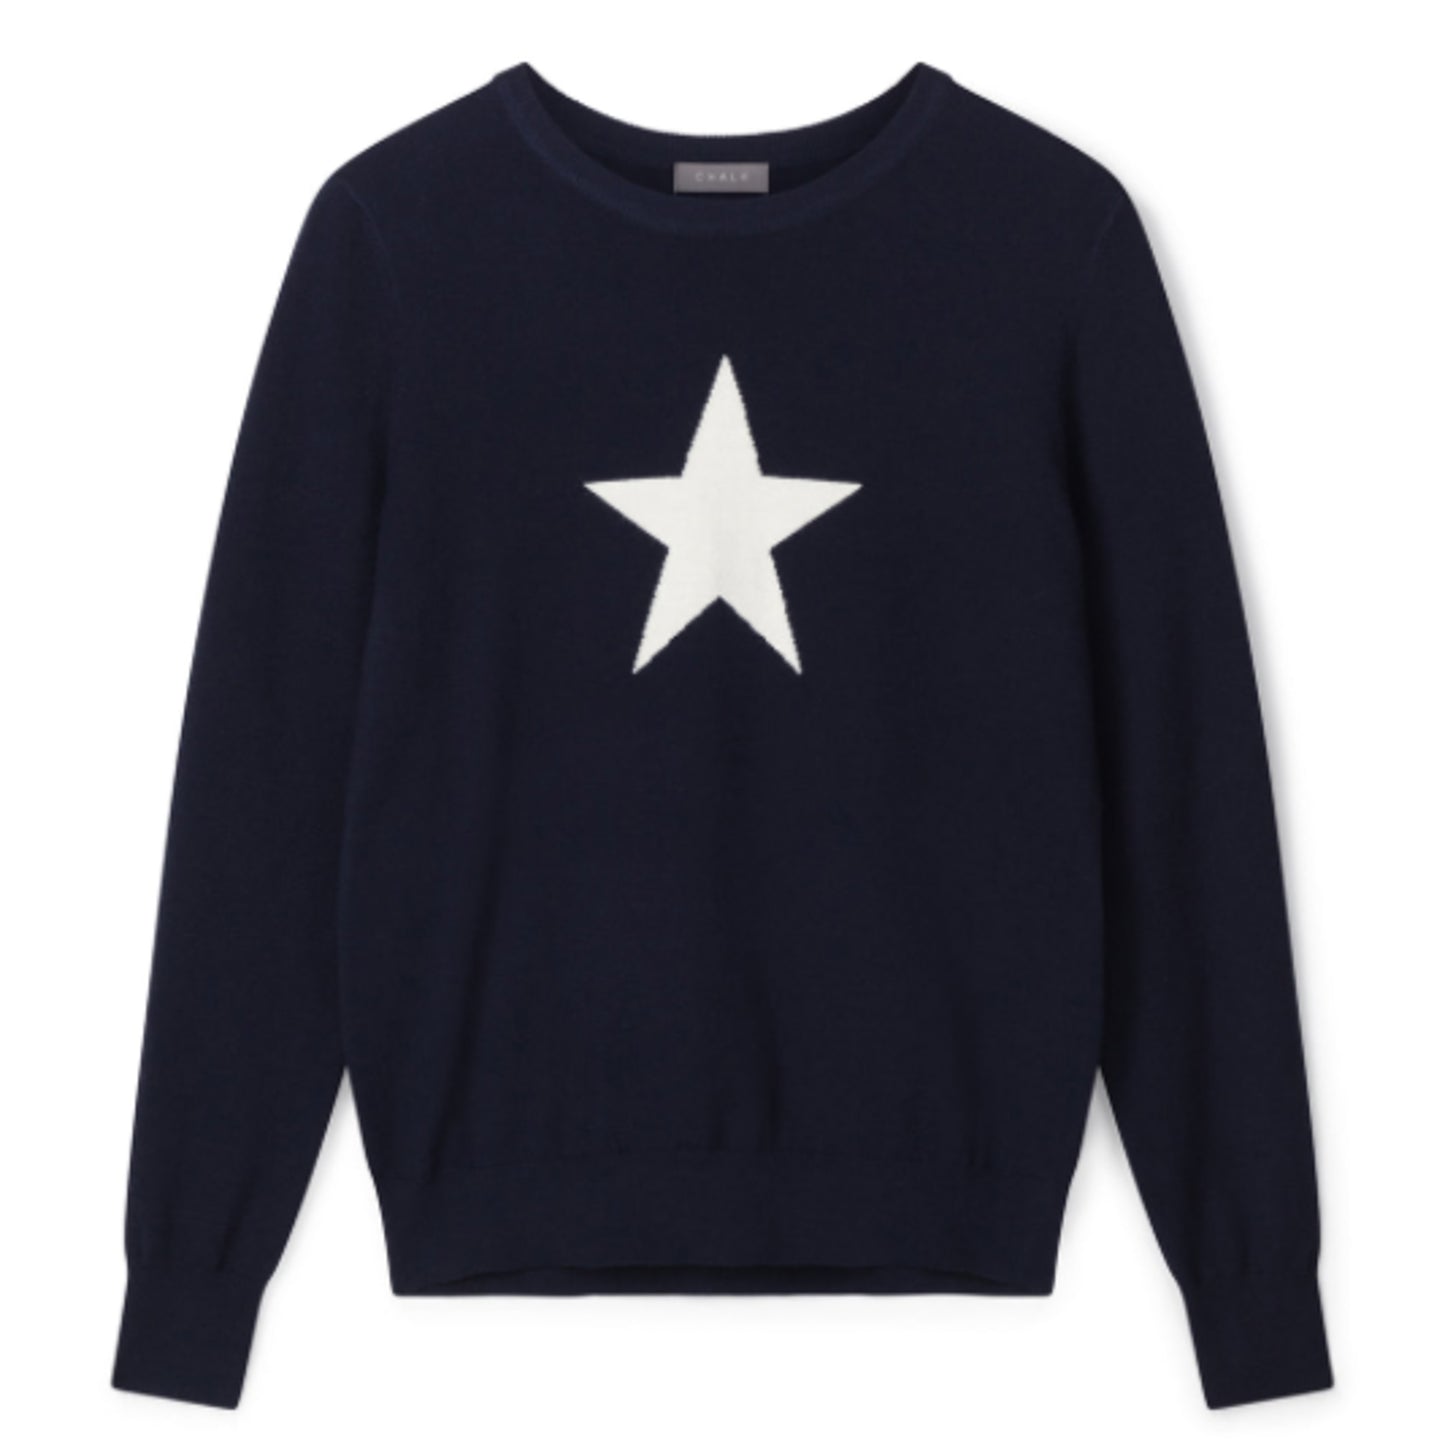 Star Jumper - one size